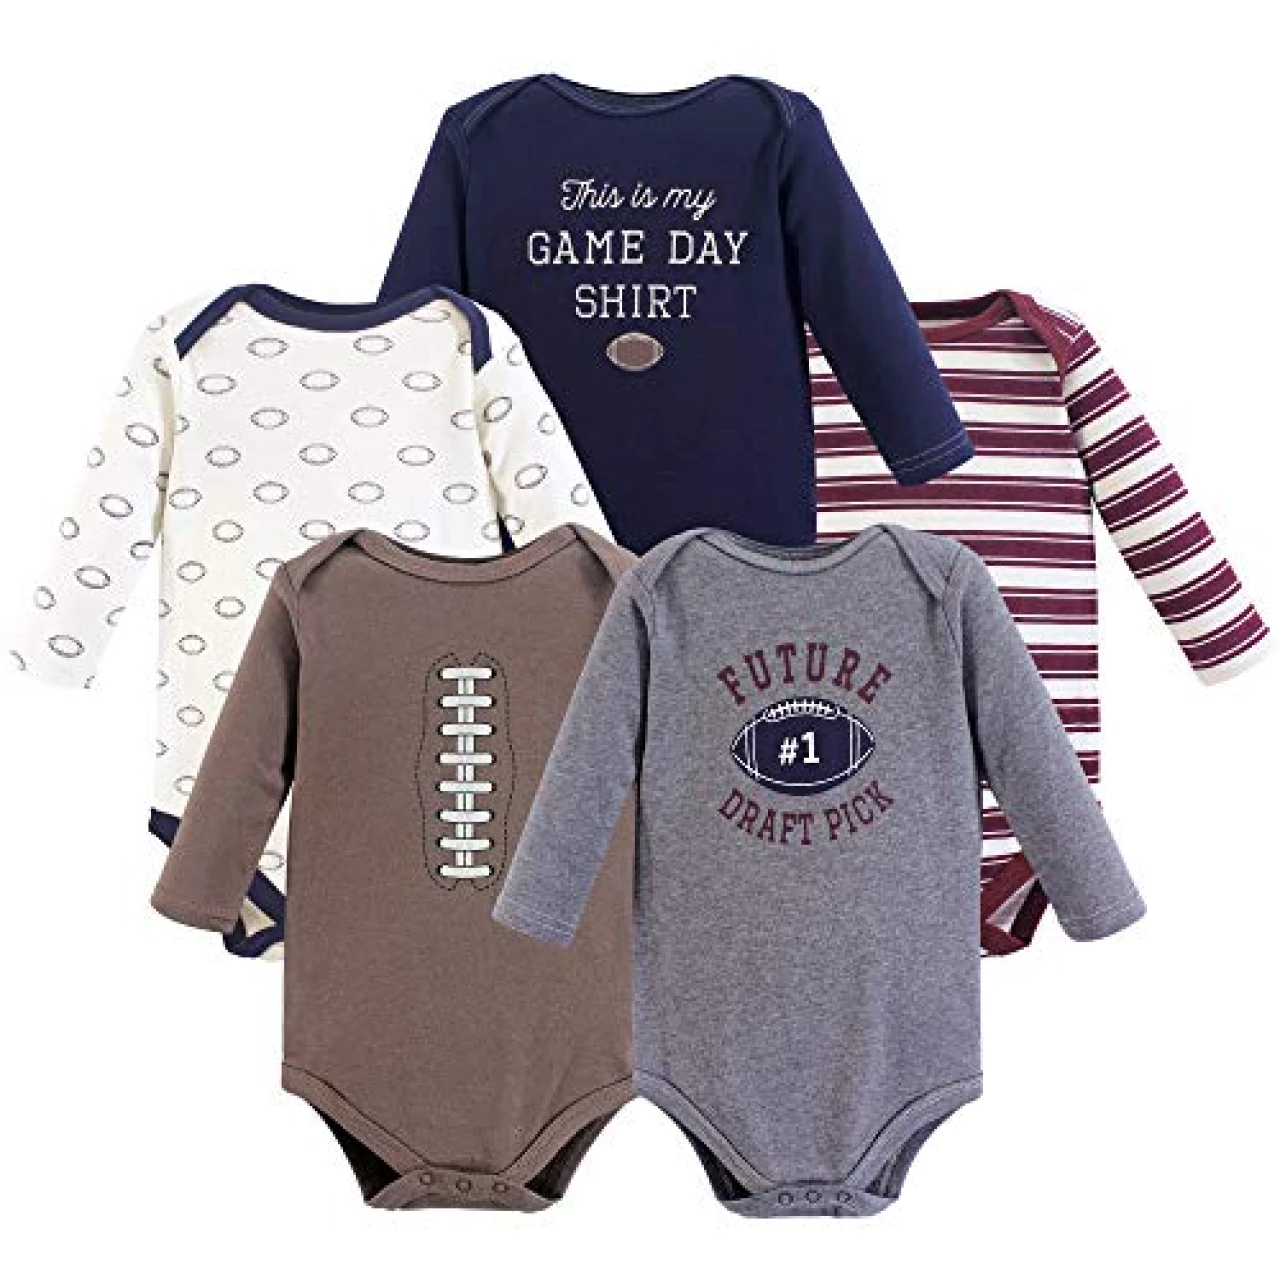 Hudson Baby Unisex Baby Cotton Long-sleeve Bodysuits, Football, 3-6 Months US